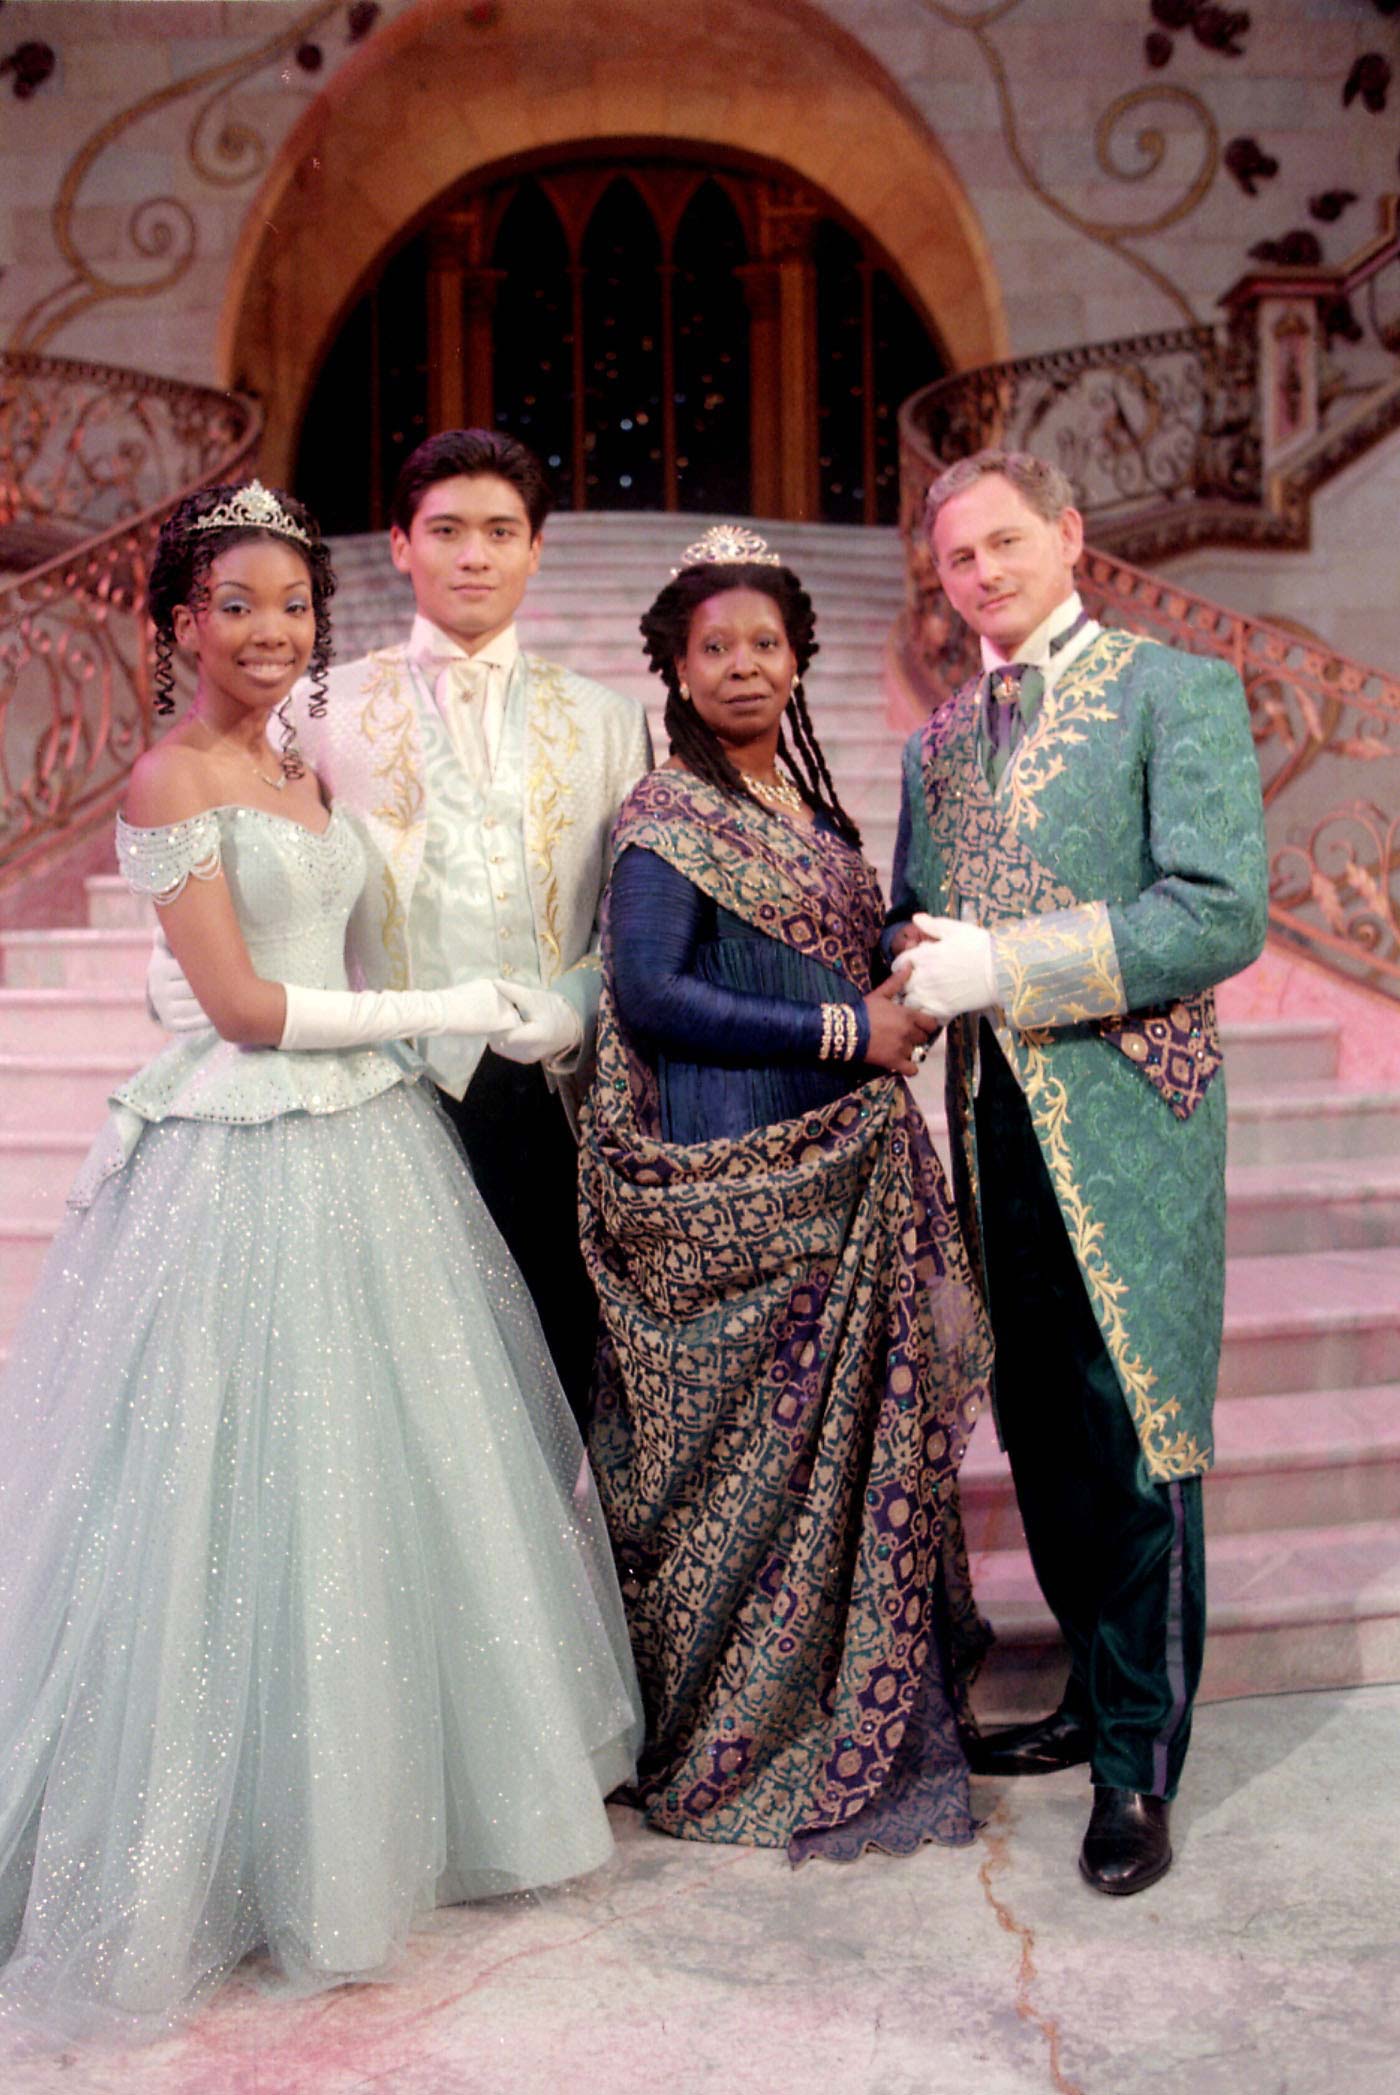 A photo from the 1997 television broadcast of Cinderella.